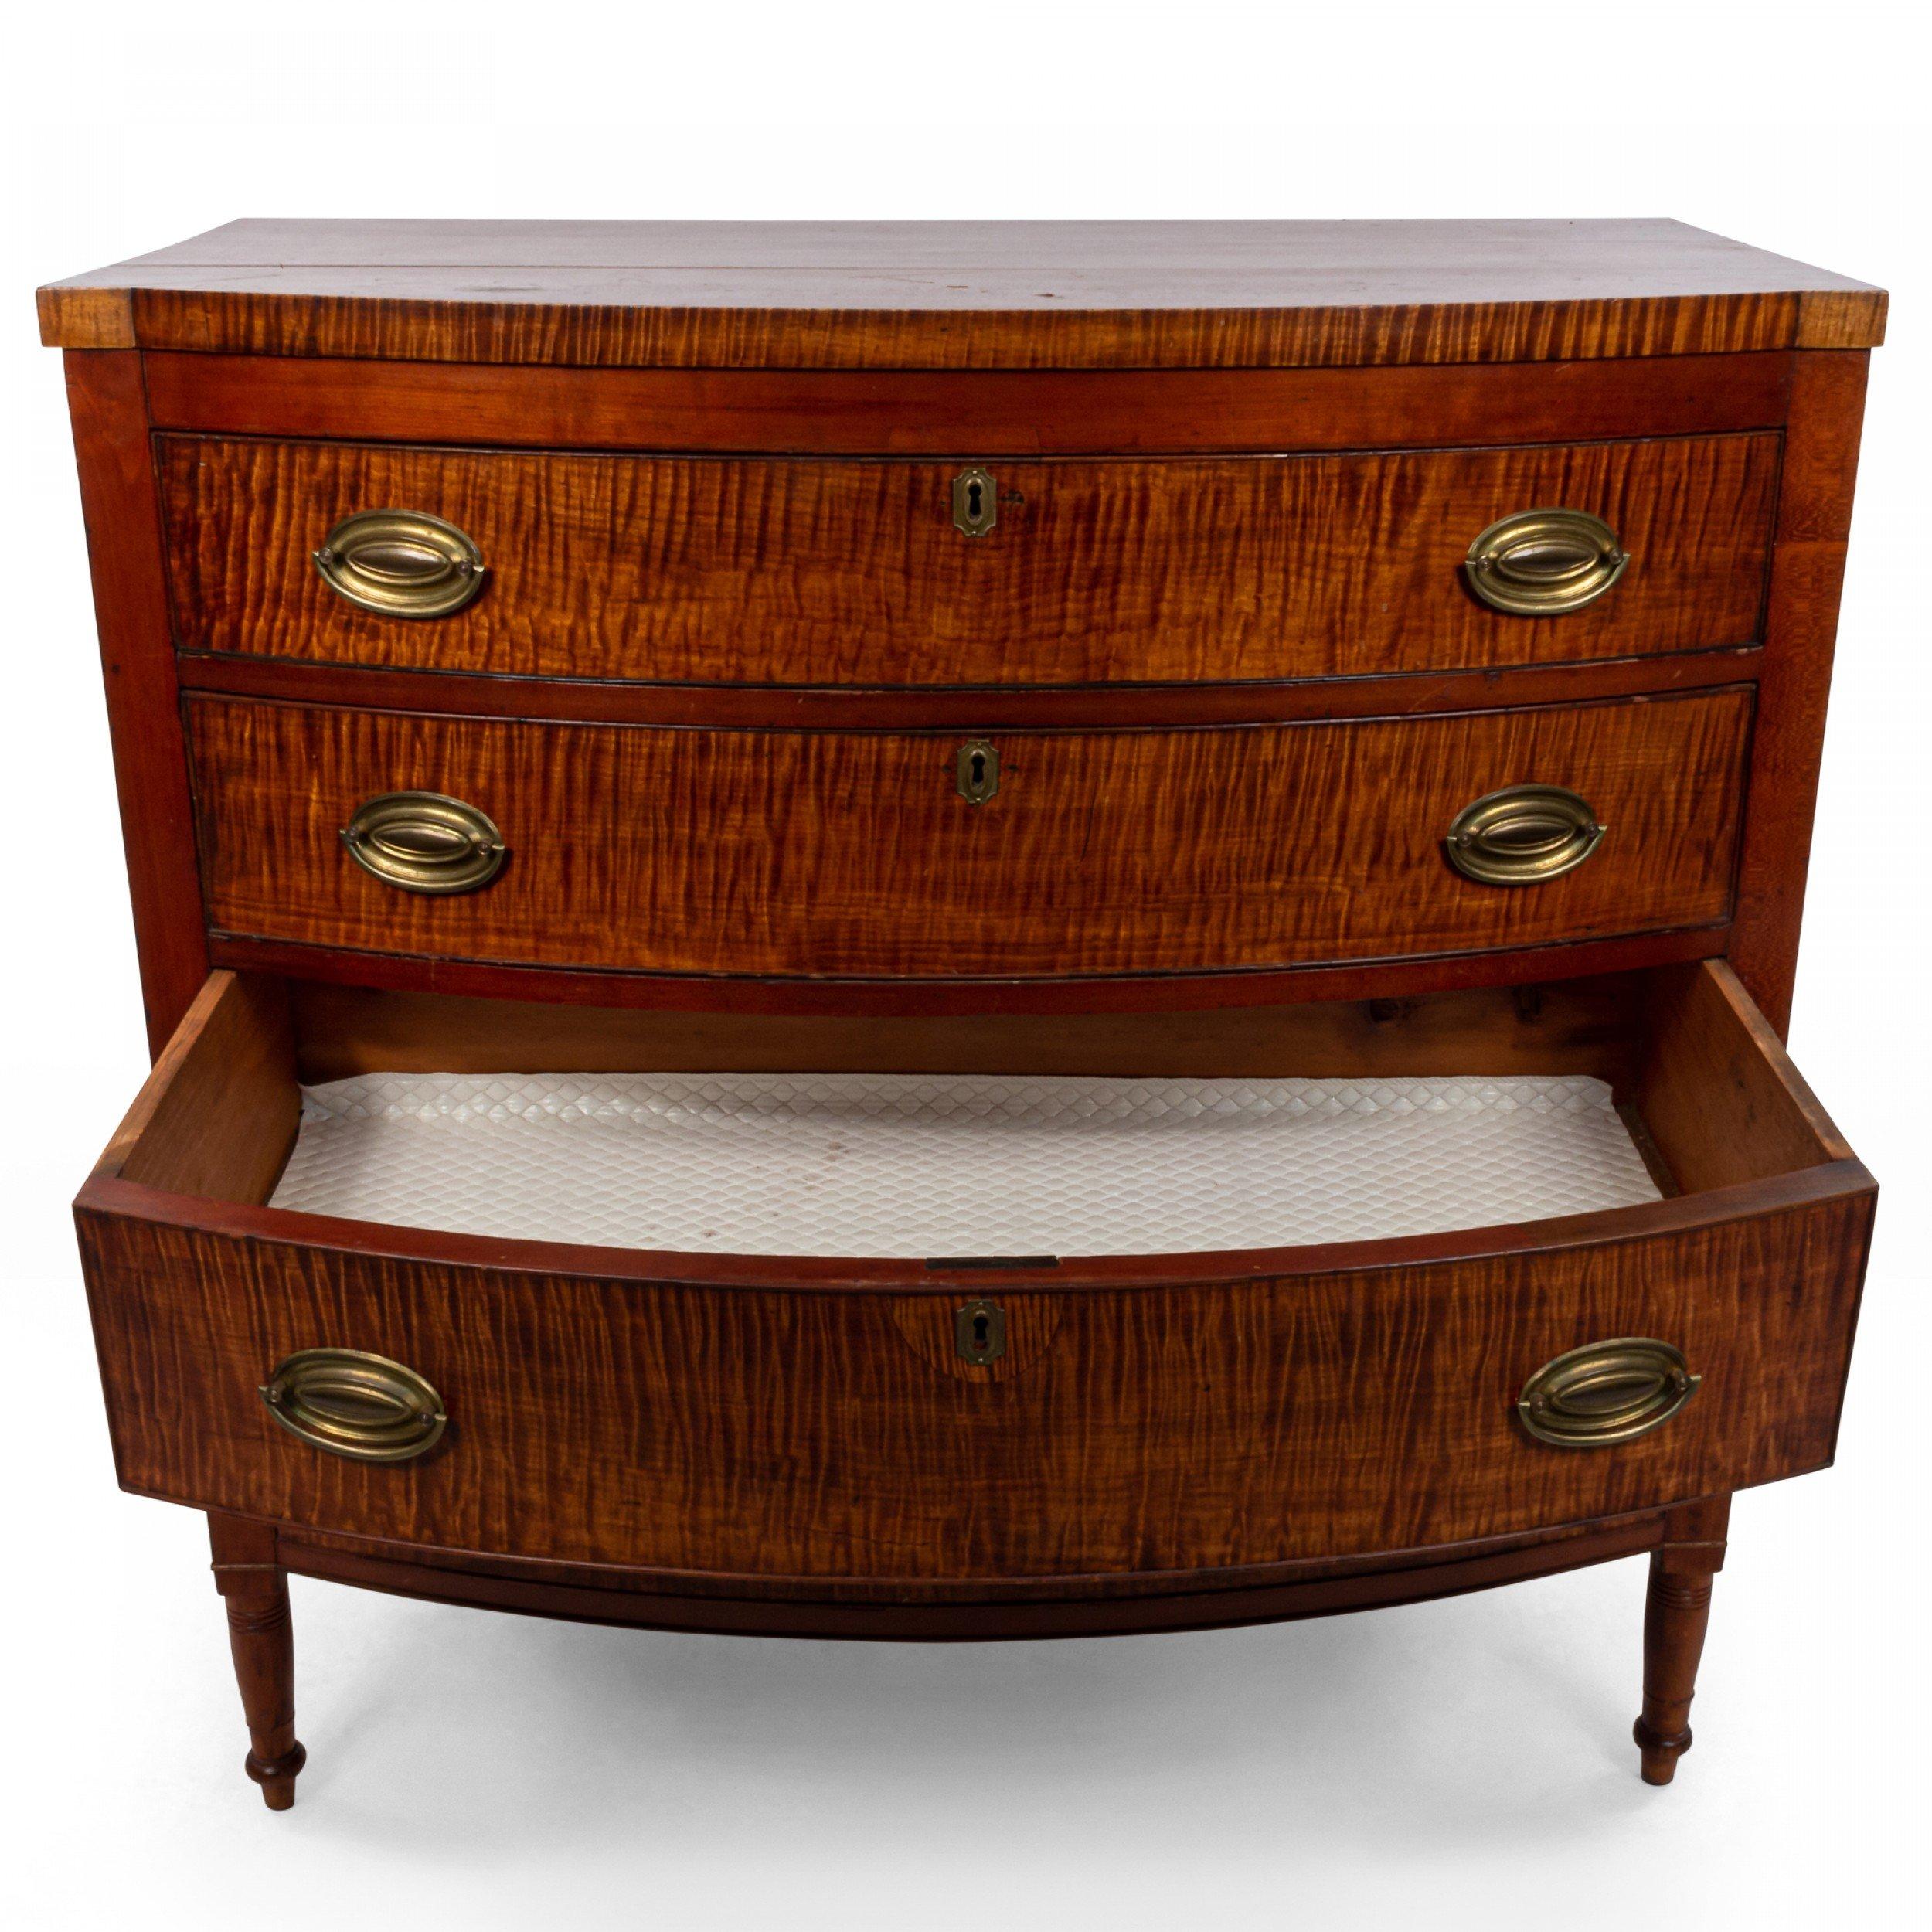 19th Century Federal Bowed Front Mahogany Chest of Drawers